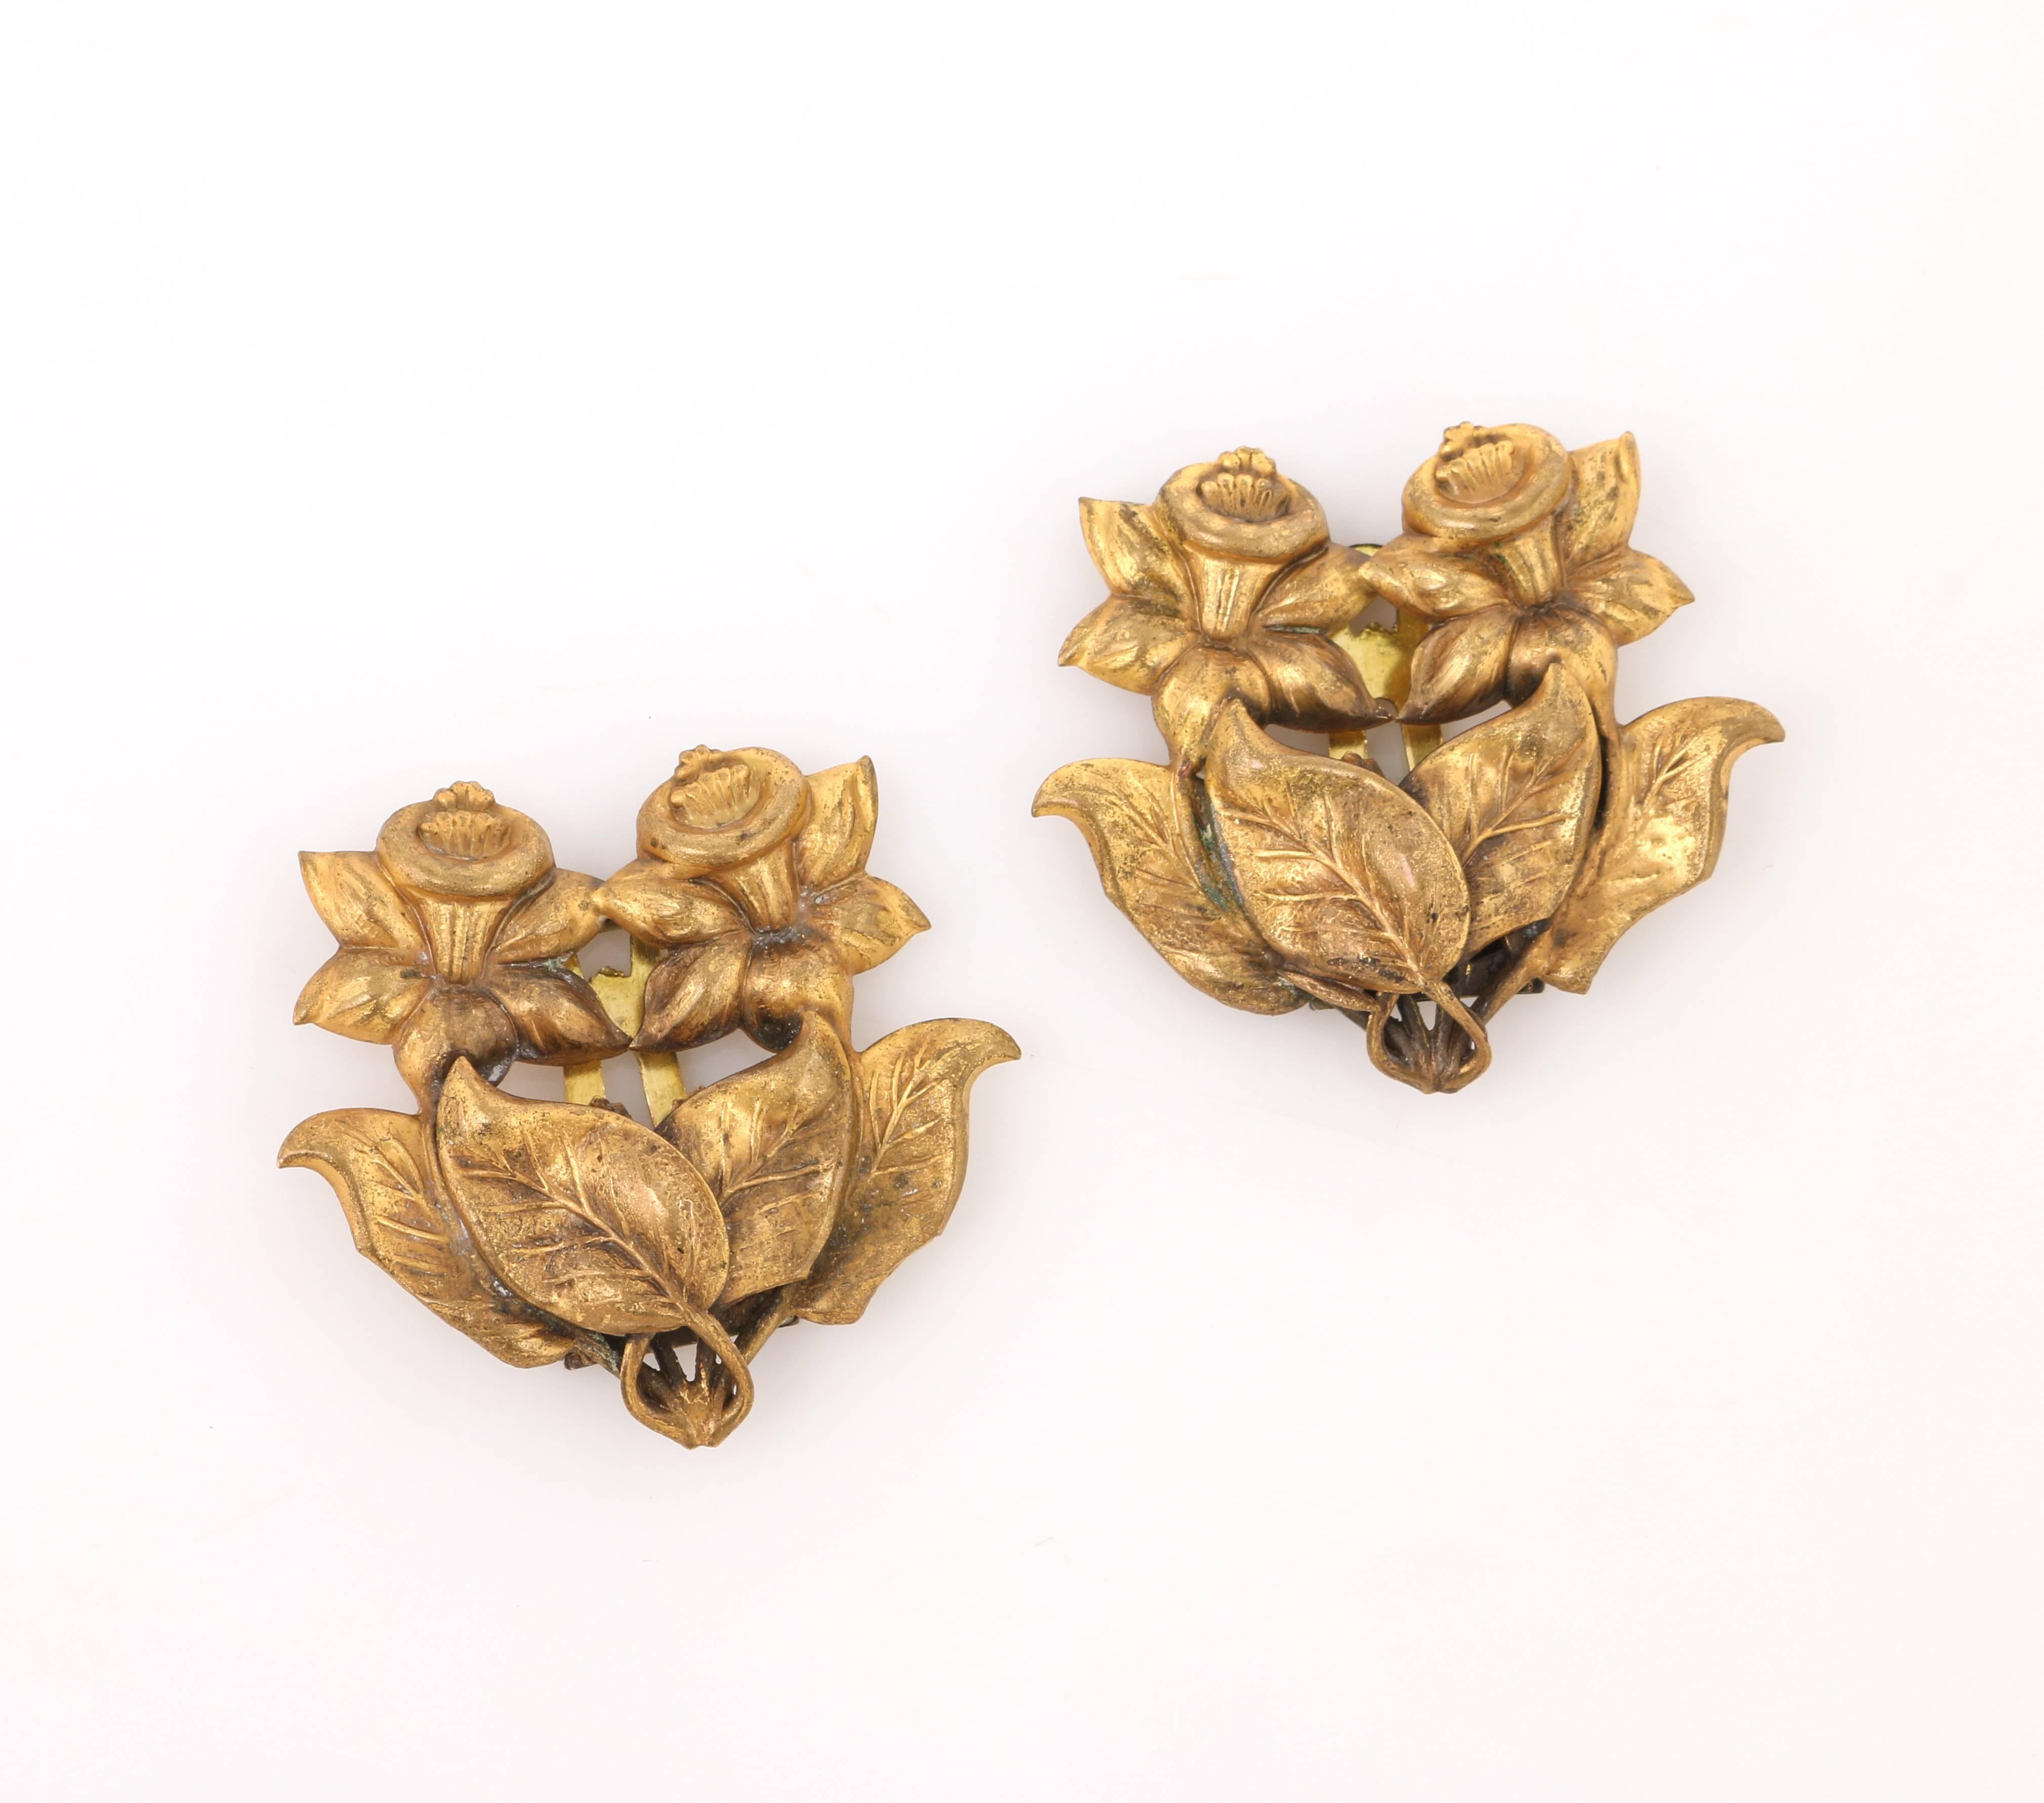 Vintage Art Nouveau c.1930's two piece brass daffodil motif dress / fur clips set. Brass-toned pressed metal interlocking daffodil motif. Hinged brass-toned metal clip at back. Both pieces are unmarked. Measurements:

Length: 1.75